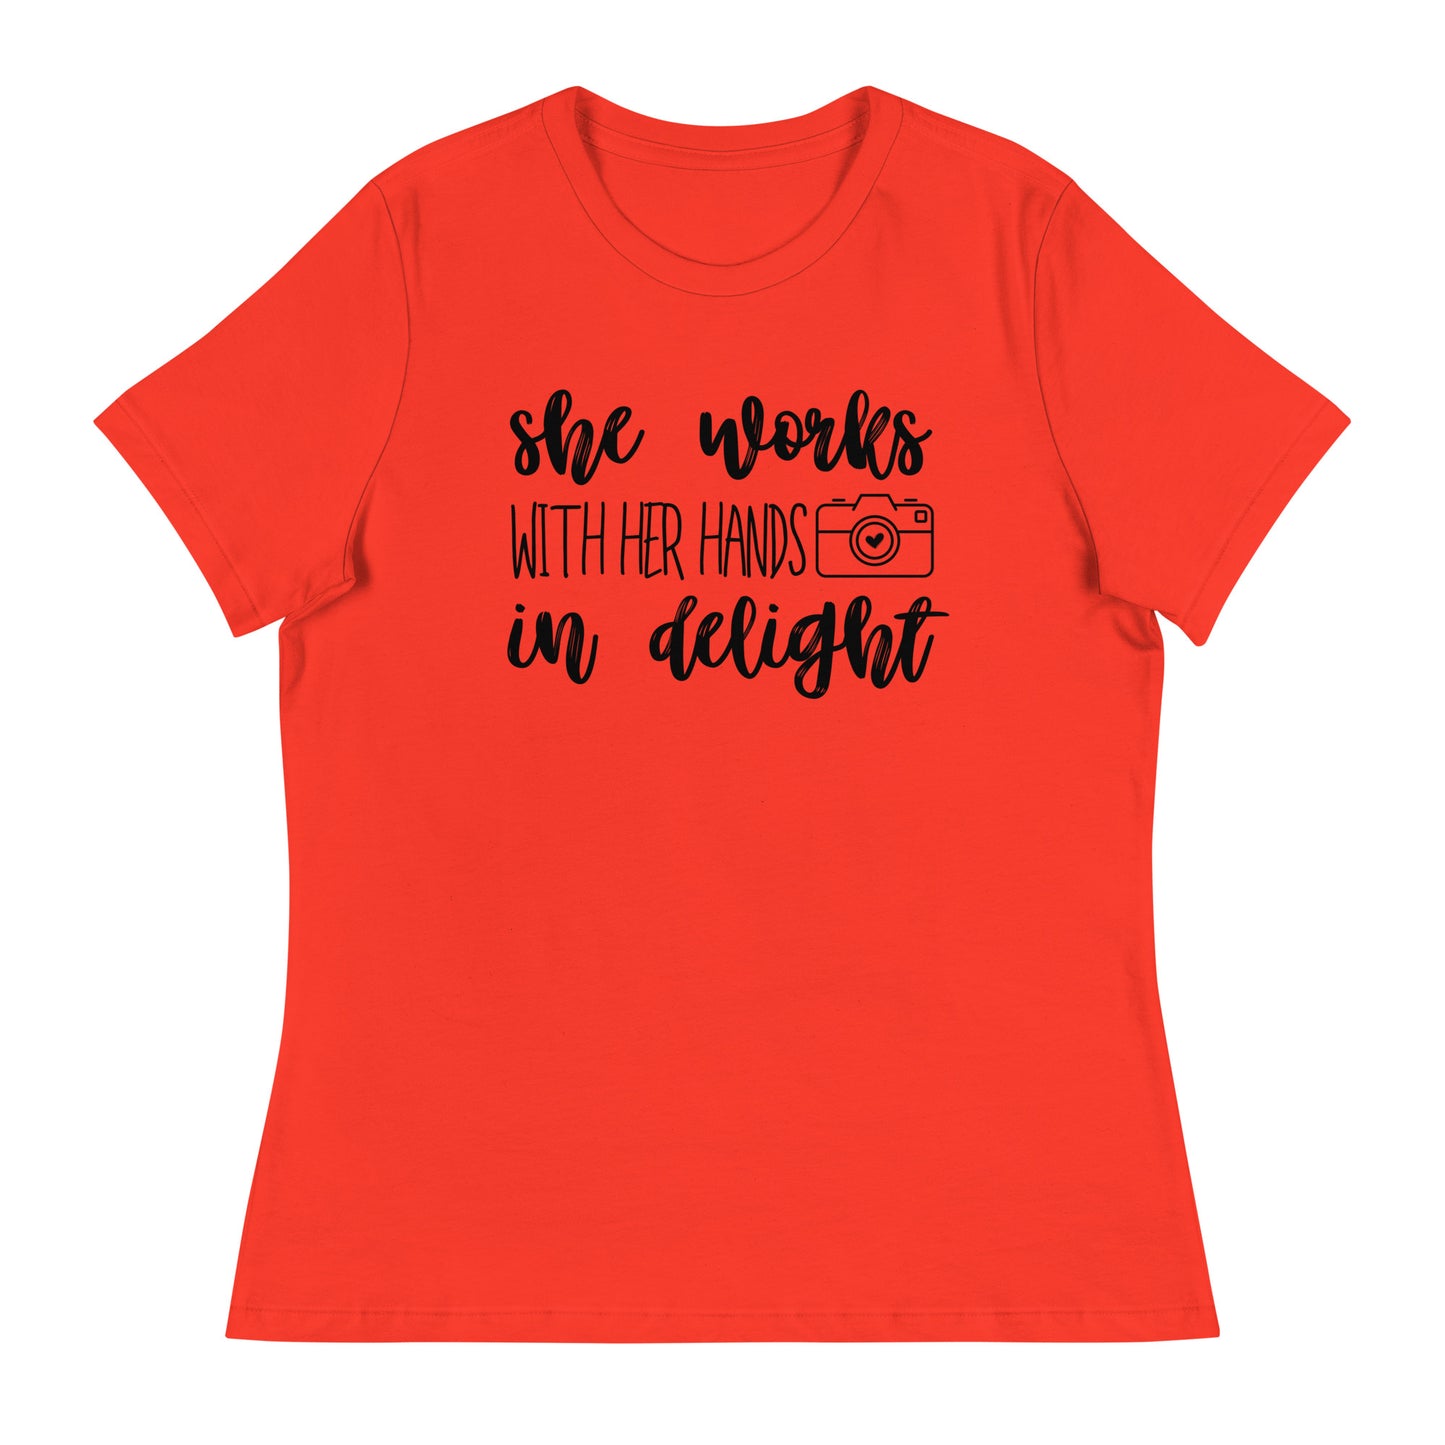 Girl Tees -She works with her hands - Black Logo